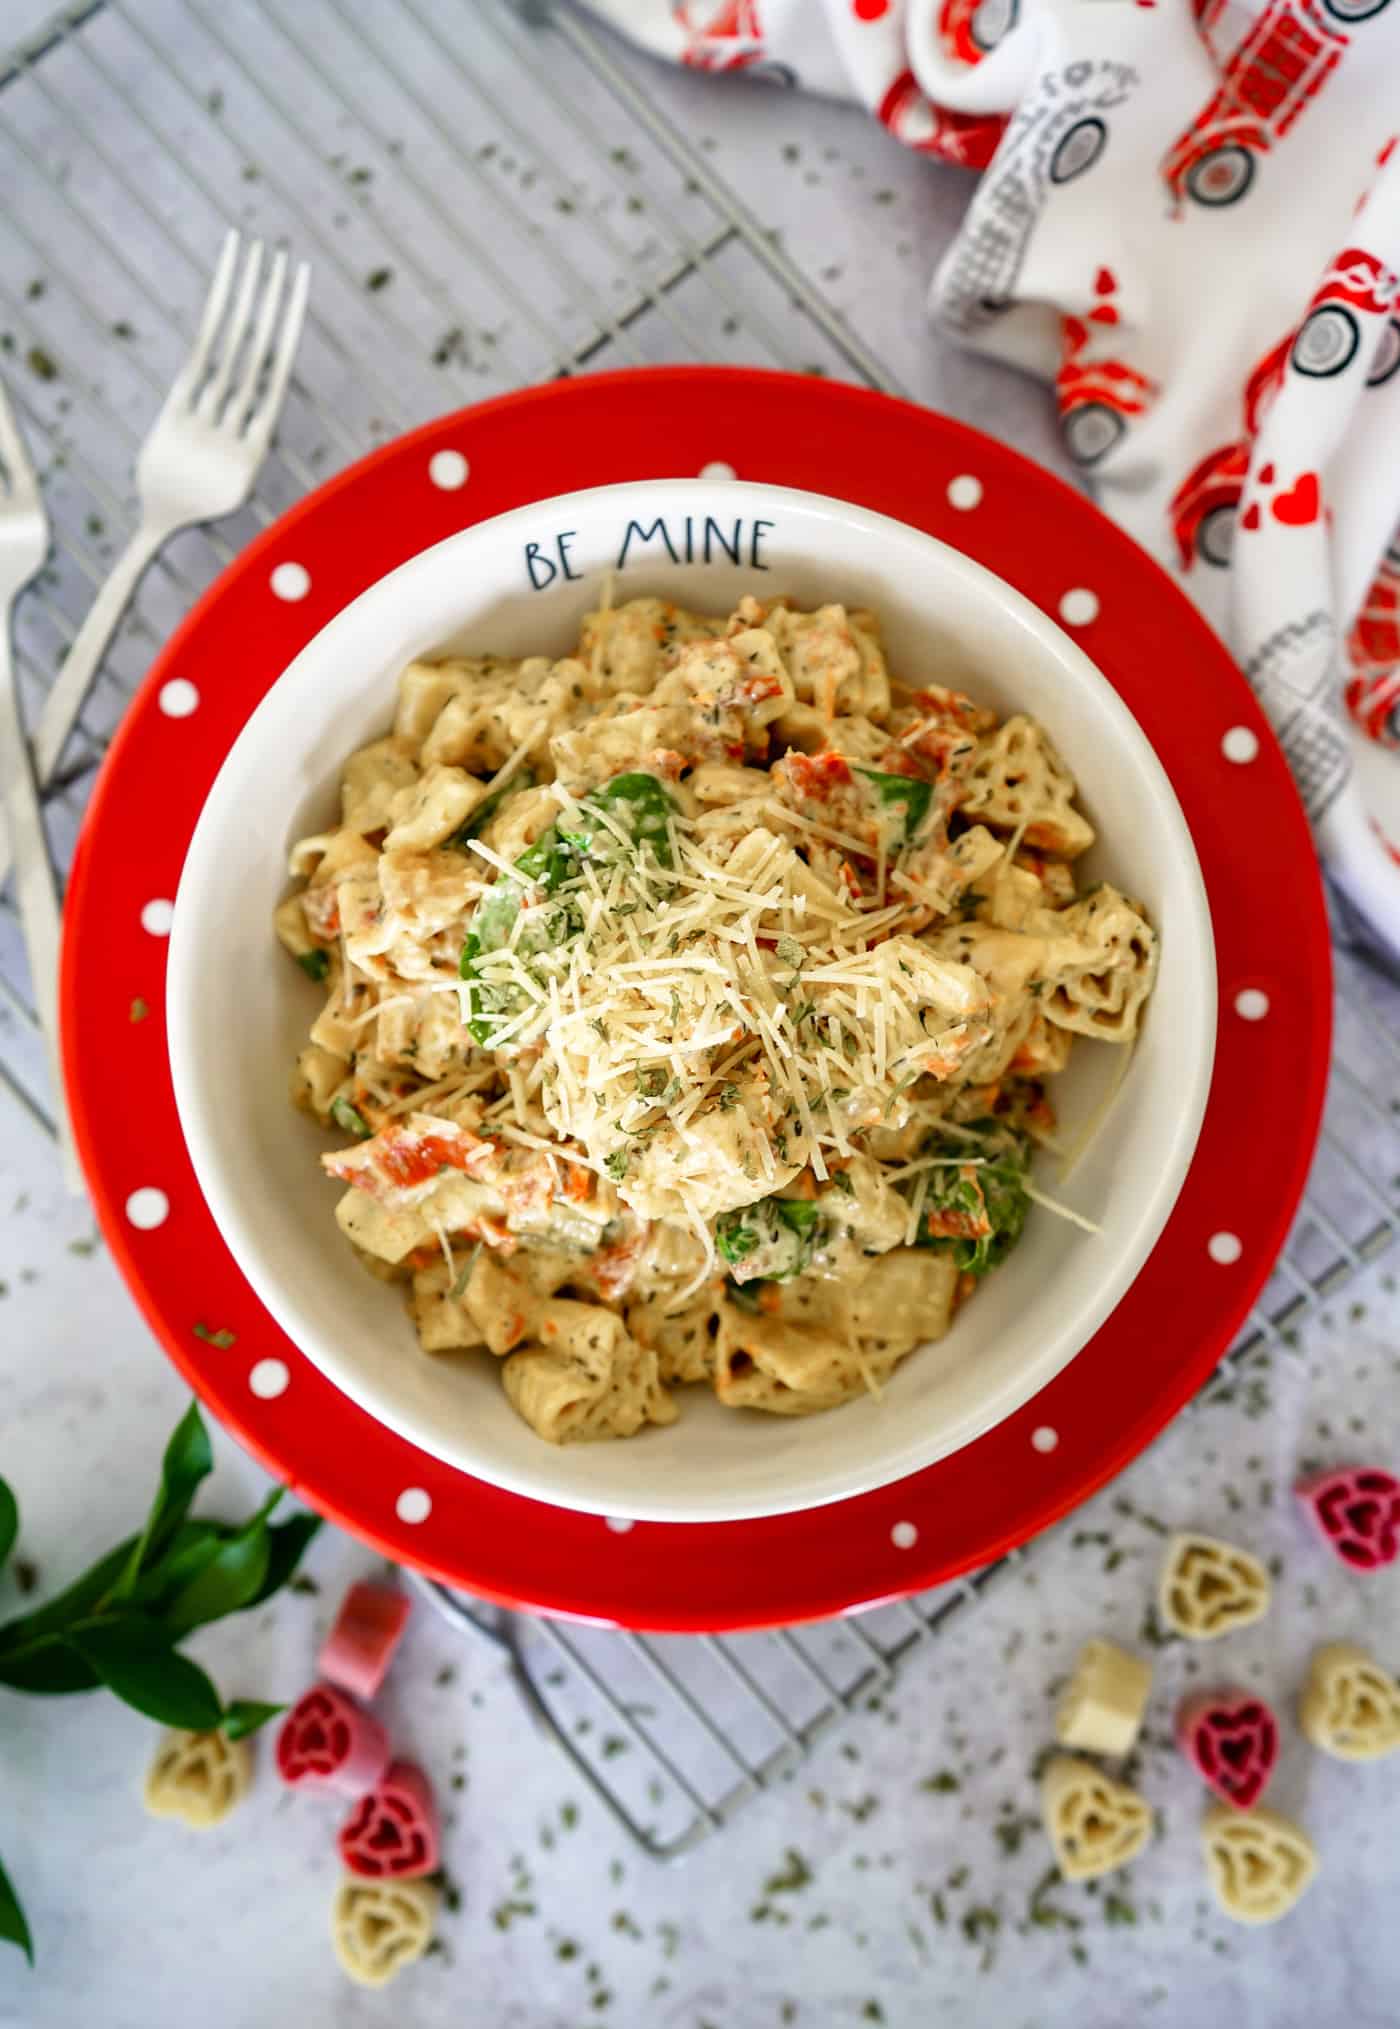 Instant Pot Tuscan Pasta is very easy to make, creamy and delicious with perfect sun dried tomatoes and spinach. Made in less than 5 minutes!